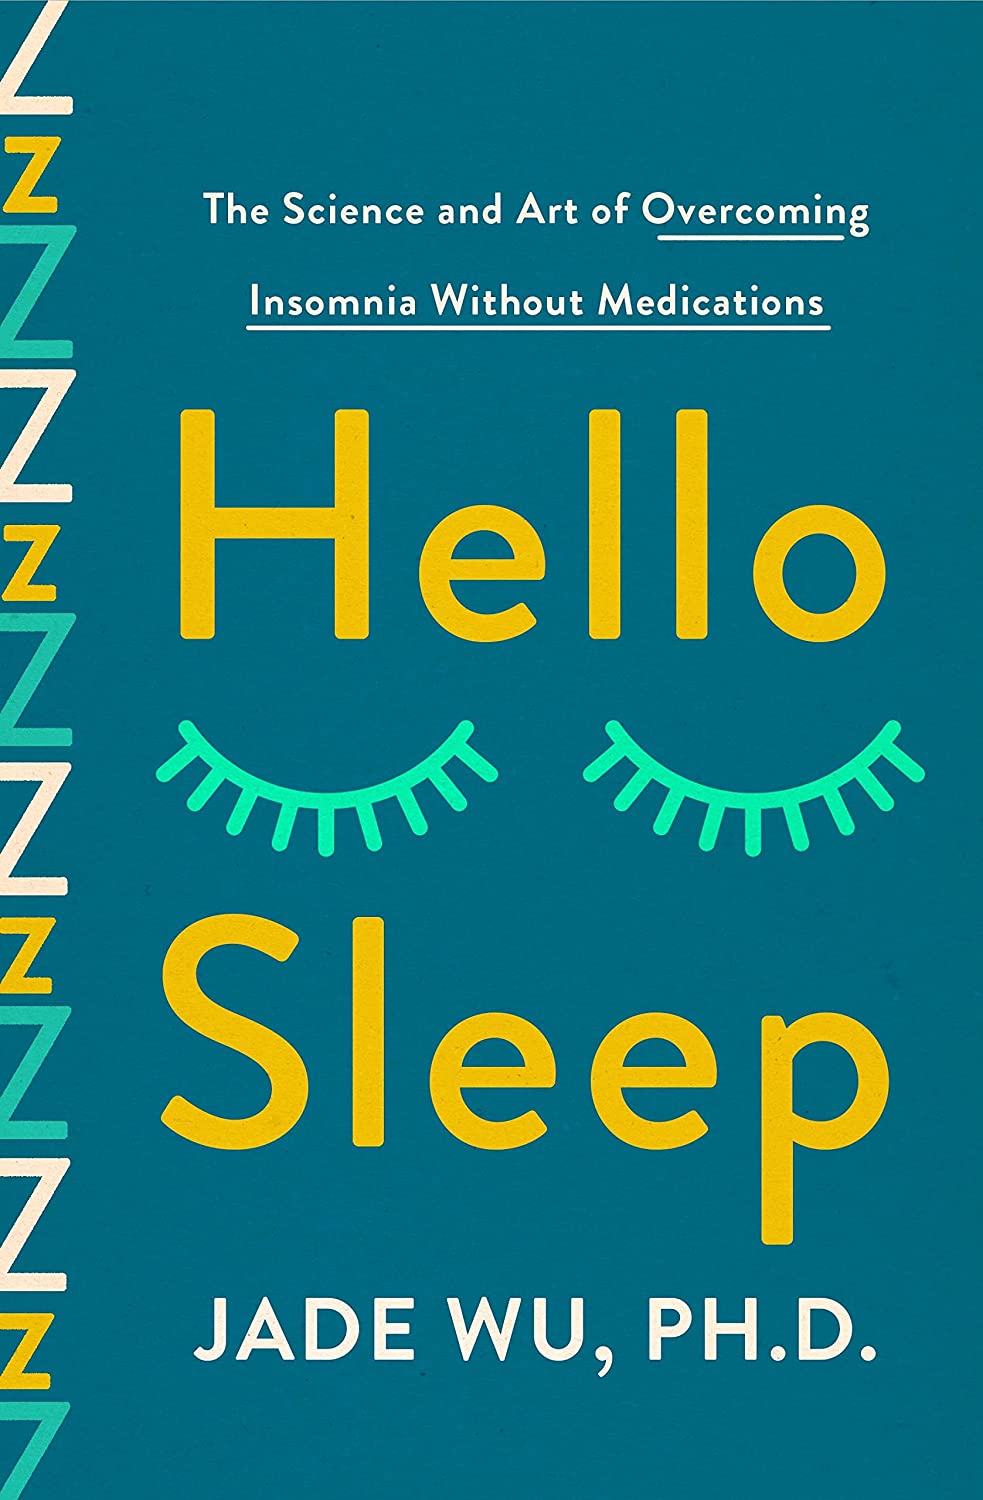 Hello Sleep: The Science and Art of Overcoming Insomnia Without Medications